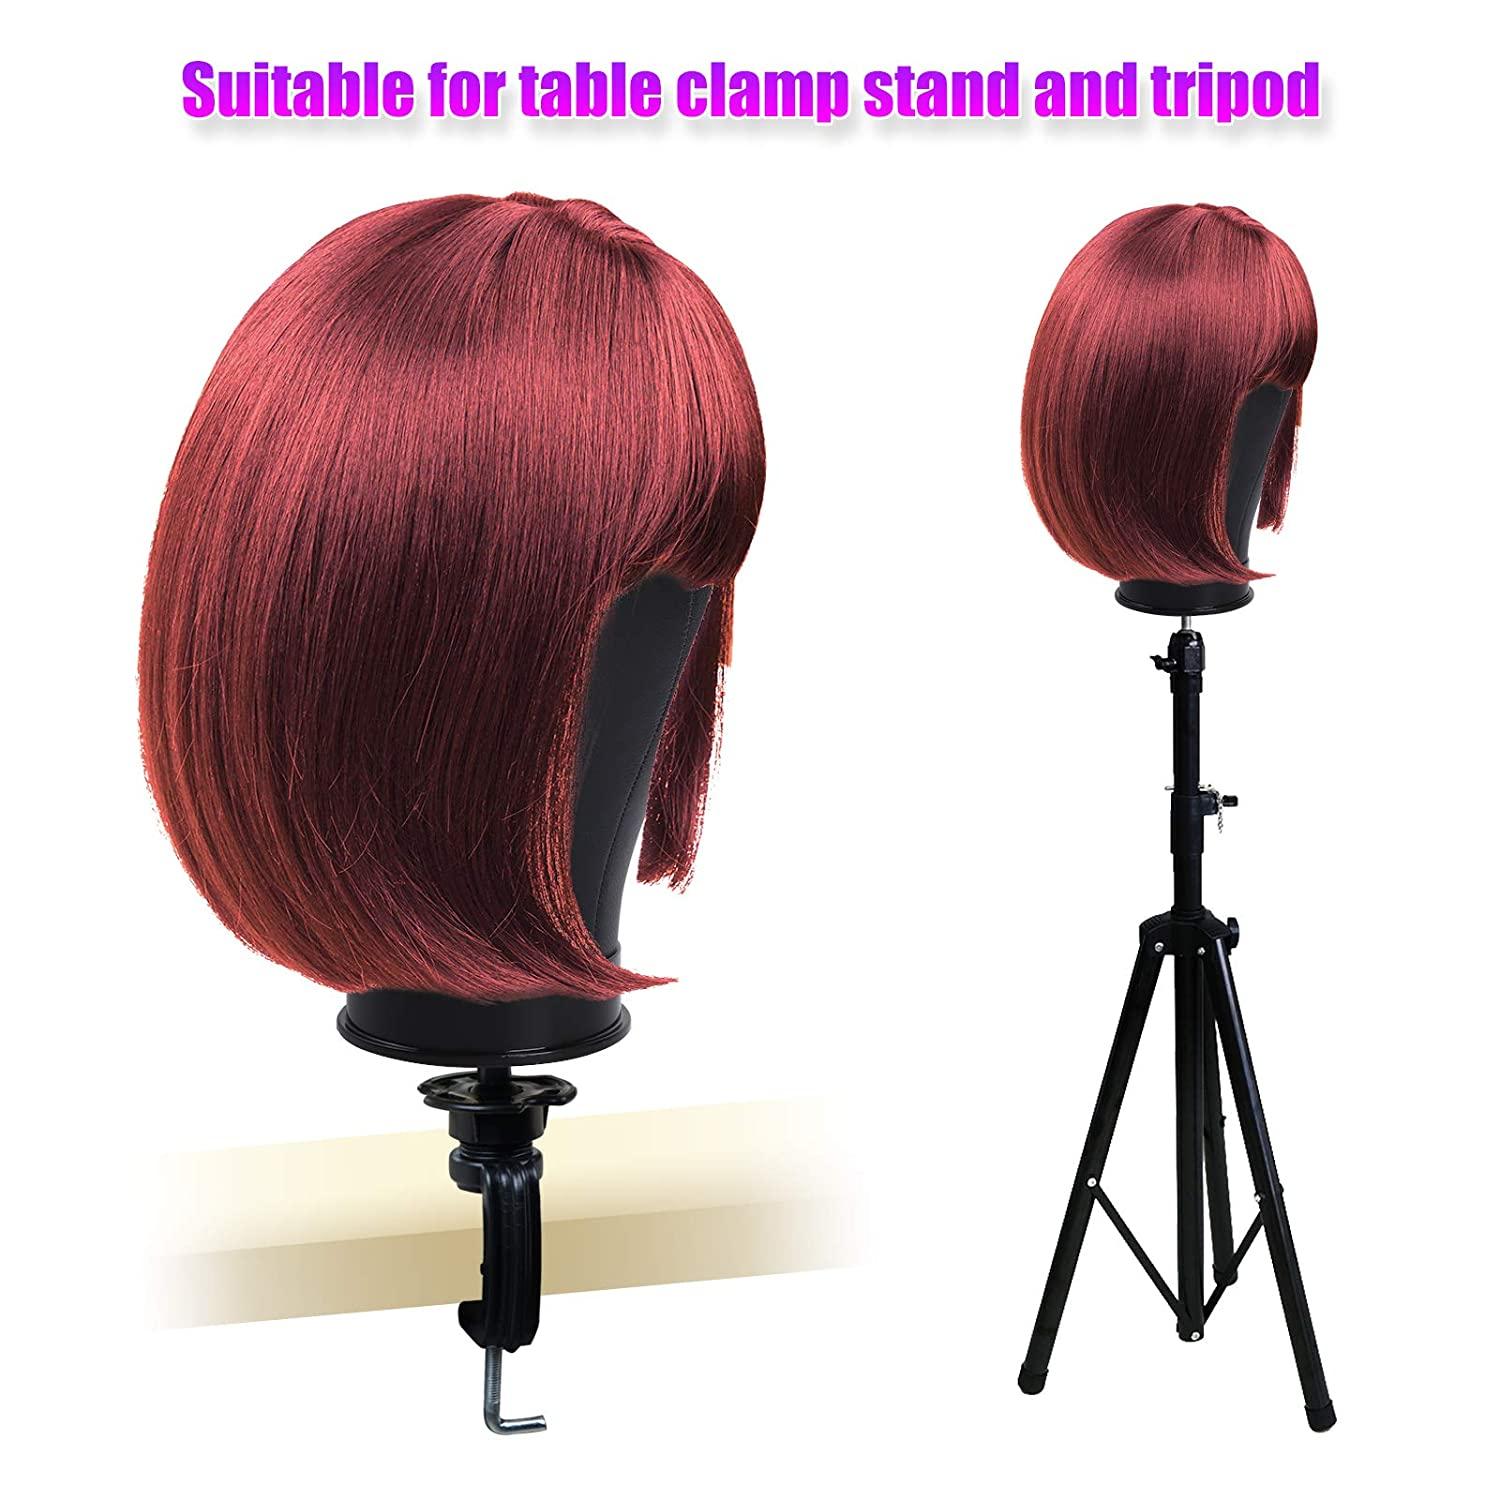 JMHAIR Wig Head,22Inch Mannequin Head Canvas Cork Block Head, for Wig  Making Display Styling,With Mount Hole